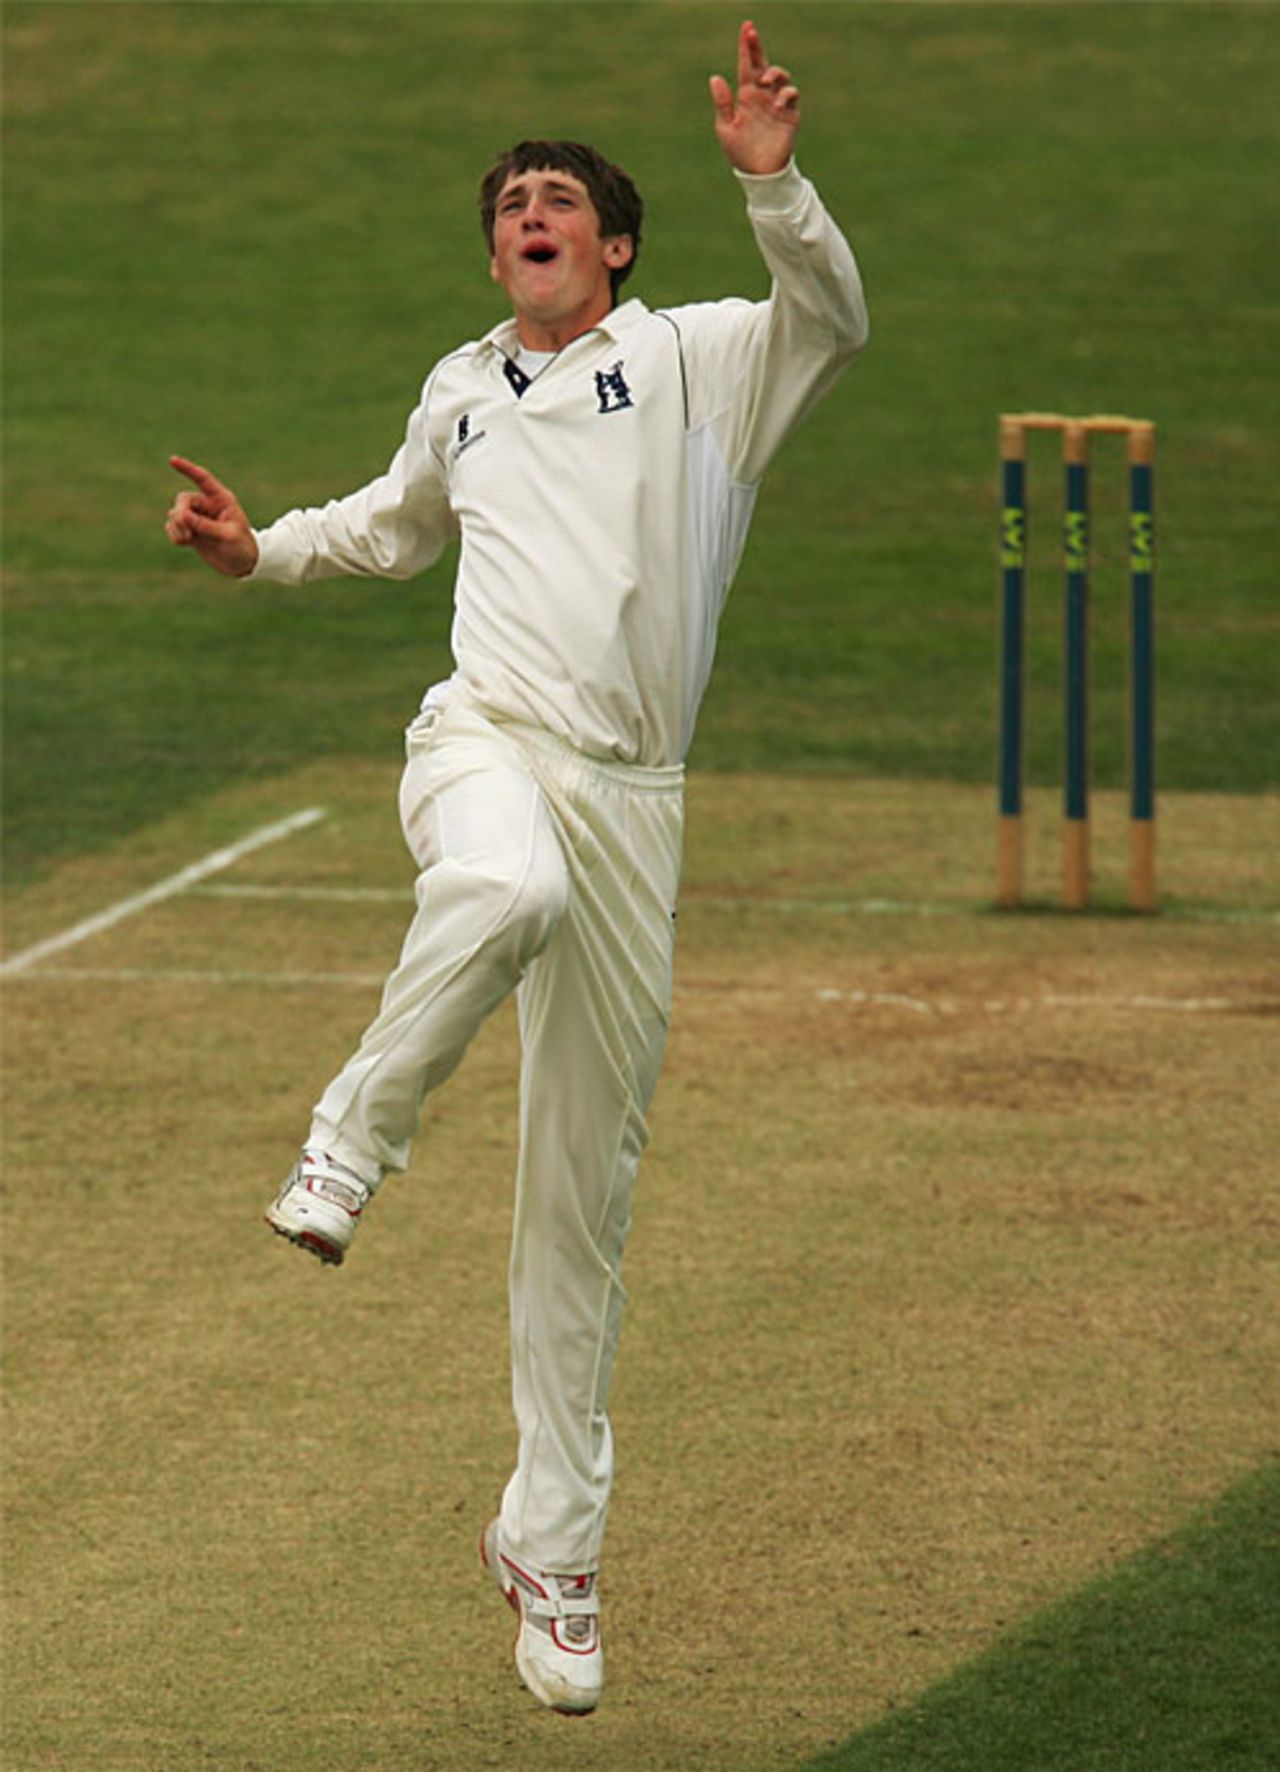 Chris Woakes celebrates the only wicket Warwickshire took on the final day, Warwickshire v Surrey, County Championship, Edgbaston, September 9, 2007